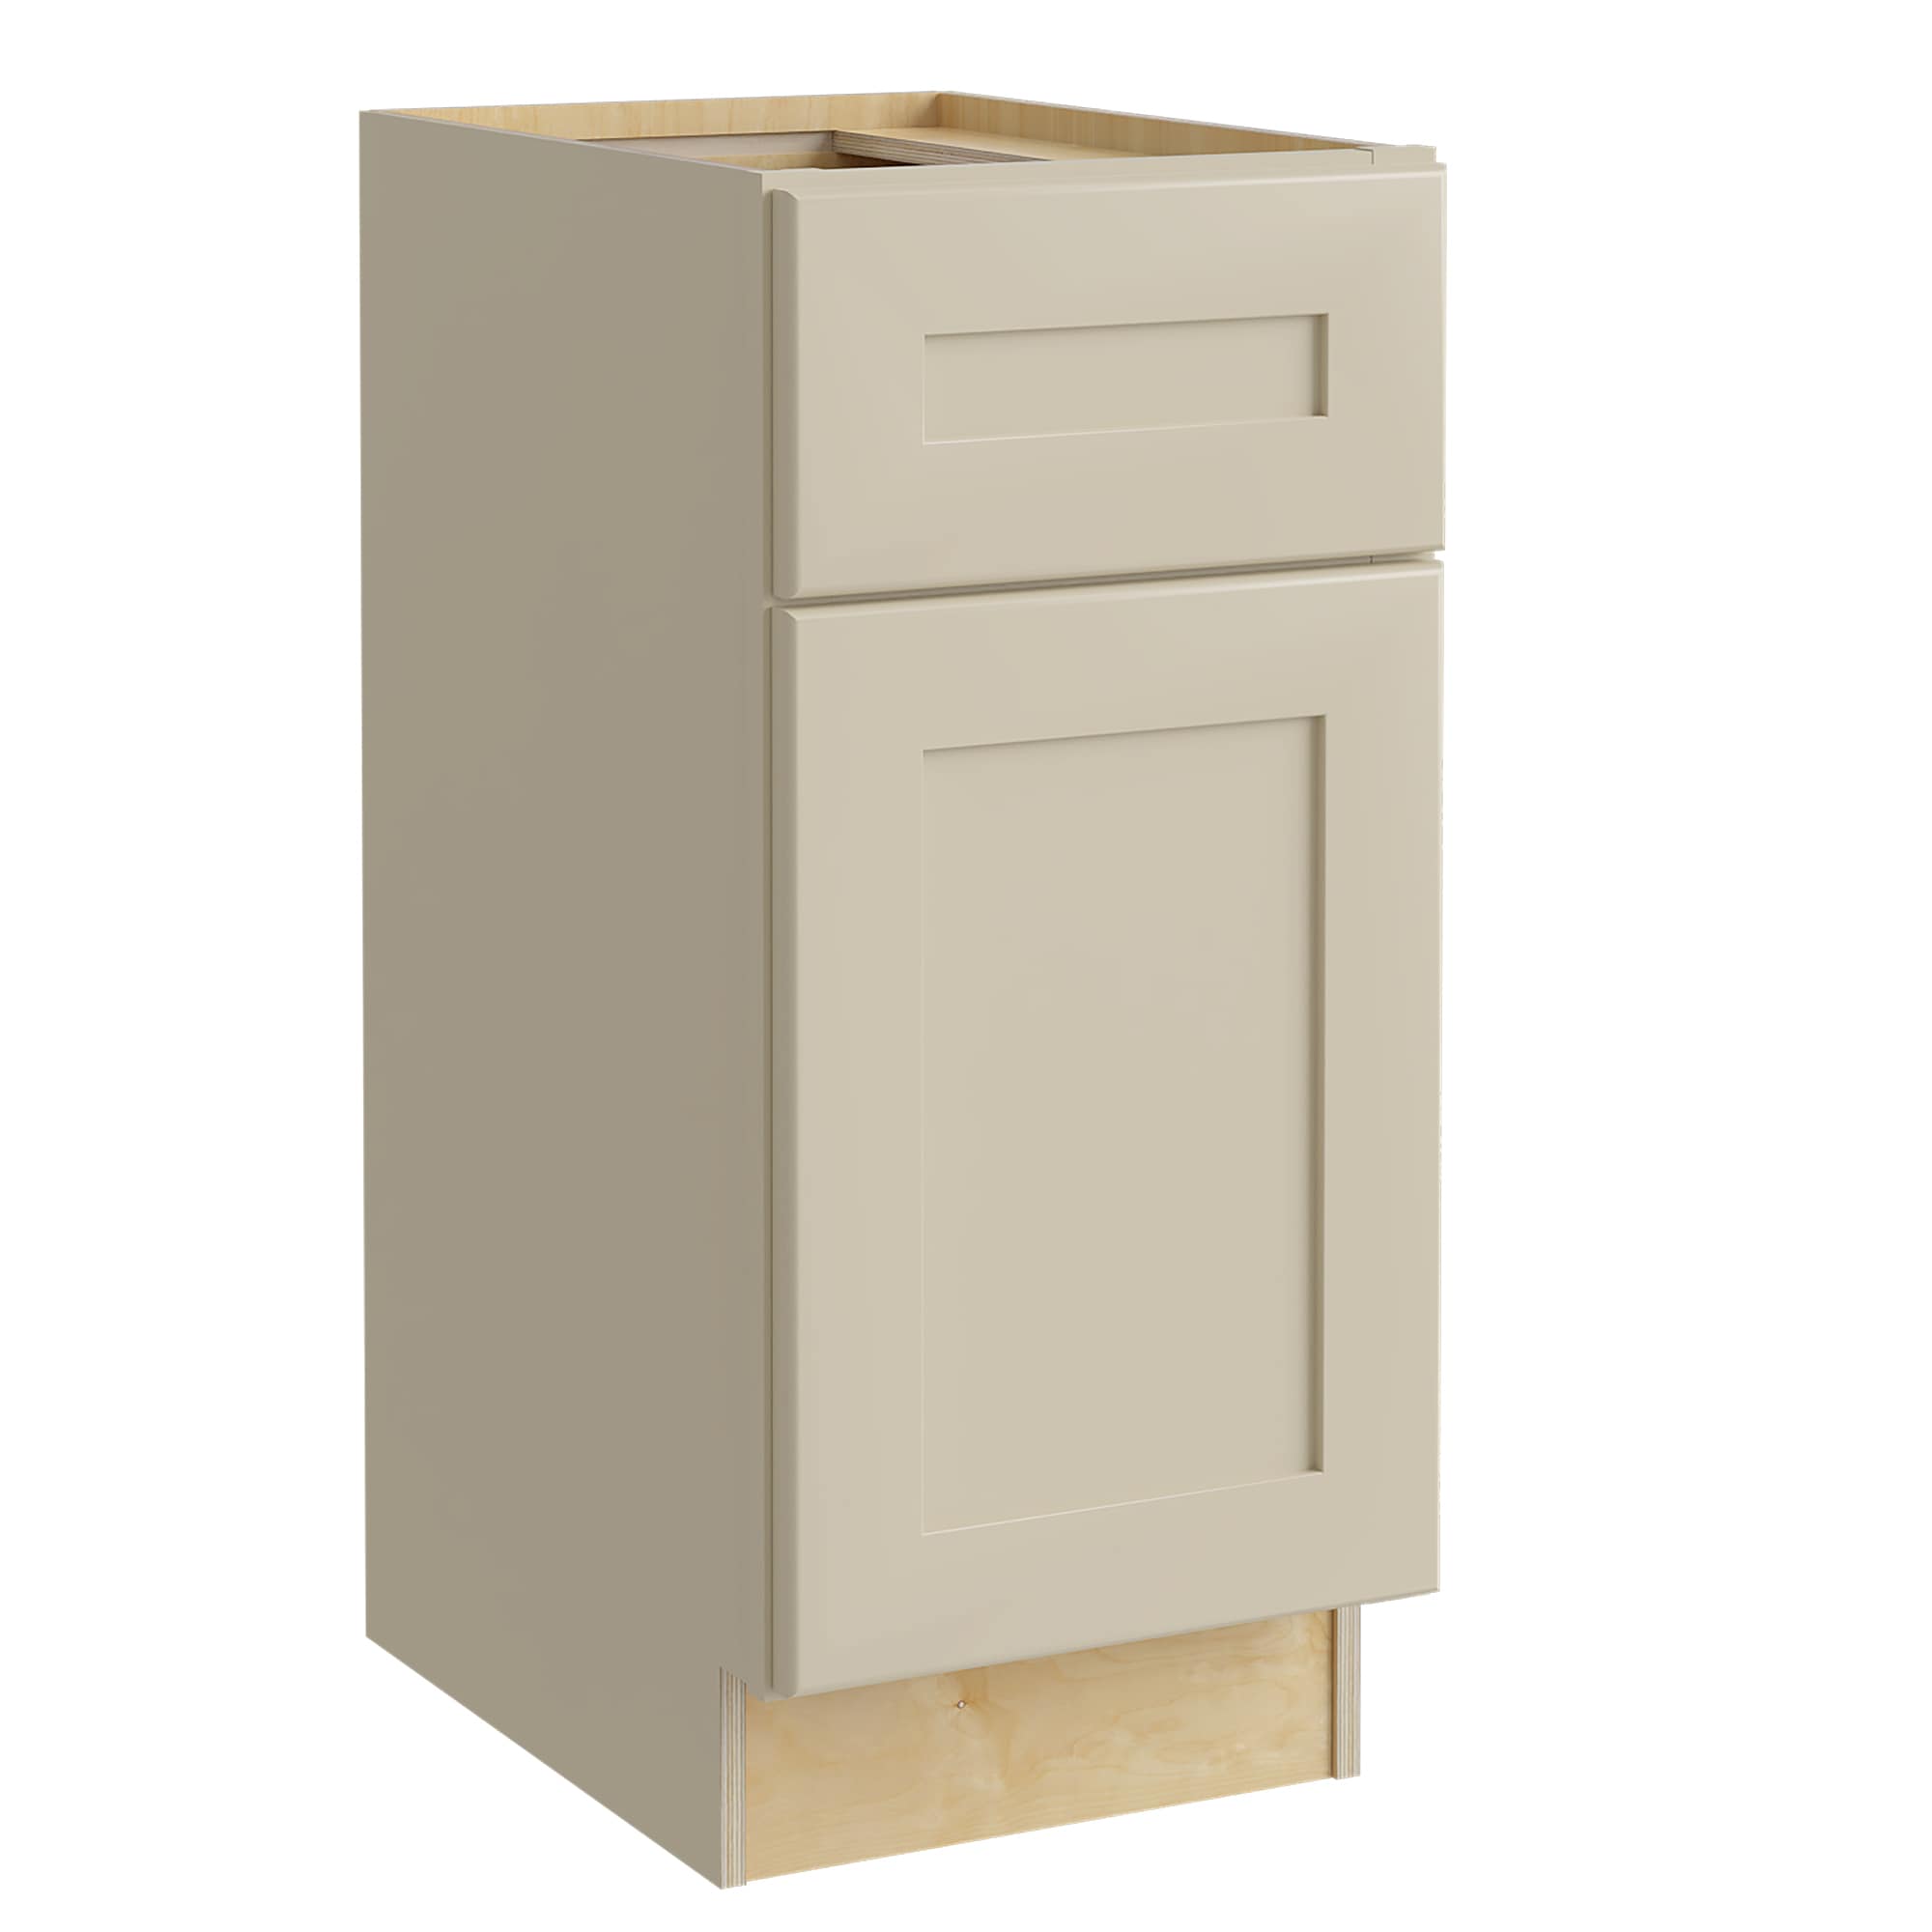 Luxxe Cabinetry 21-in W x 34.5-in H x 21-in D Norfolk Blended Cream Painted Sink Base Fully Assembled Semi-custom Cabinet in Off-White | VSB2121R-NBC